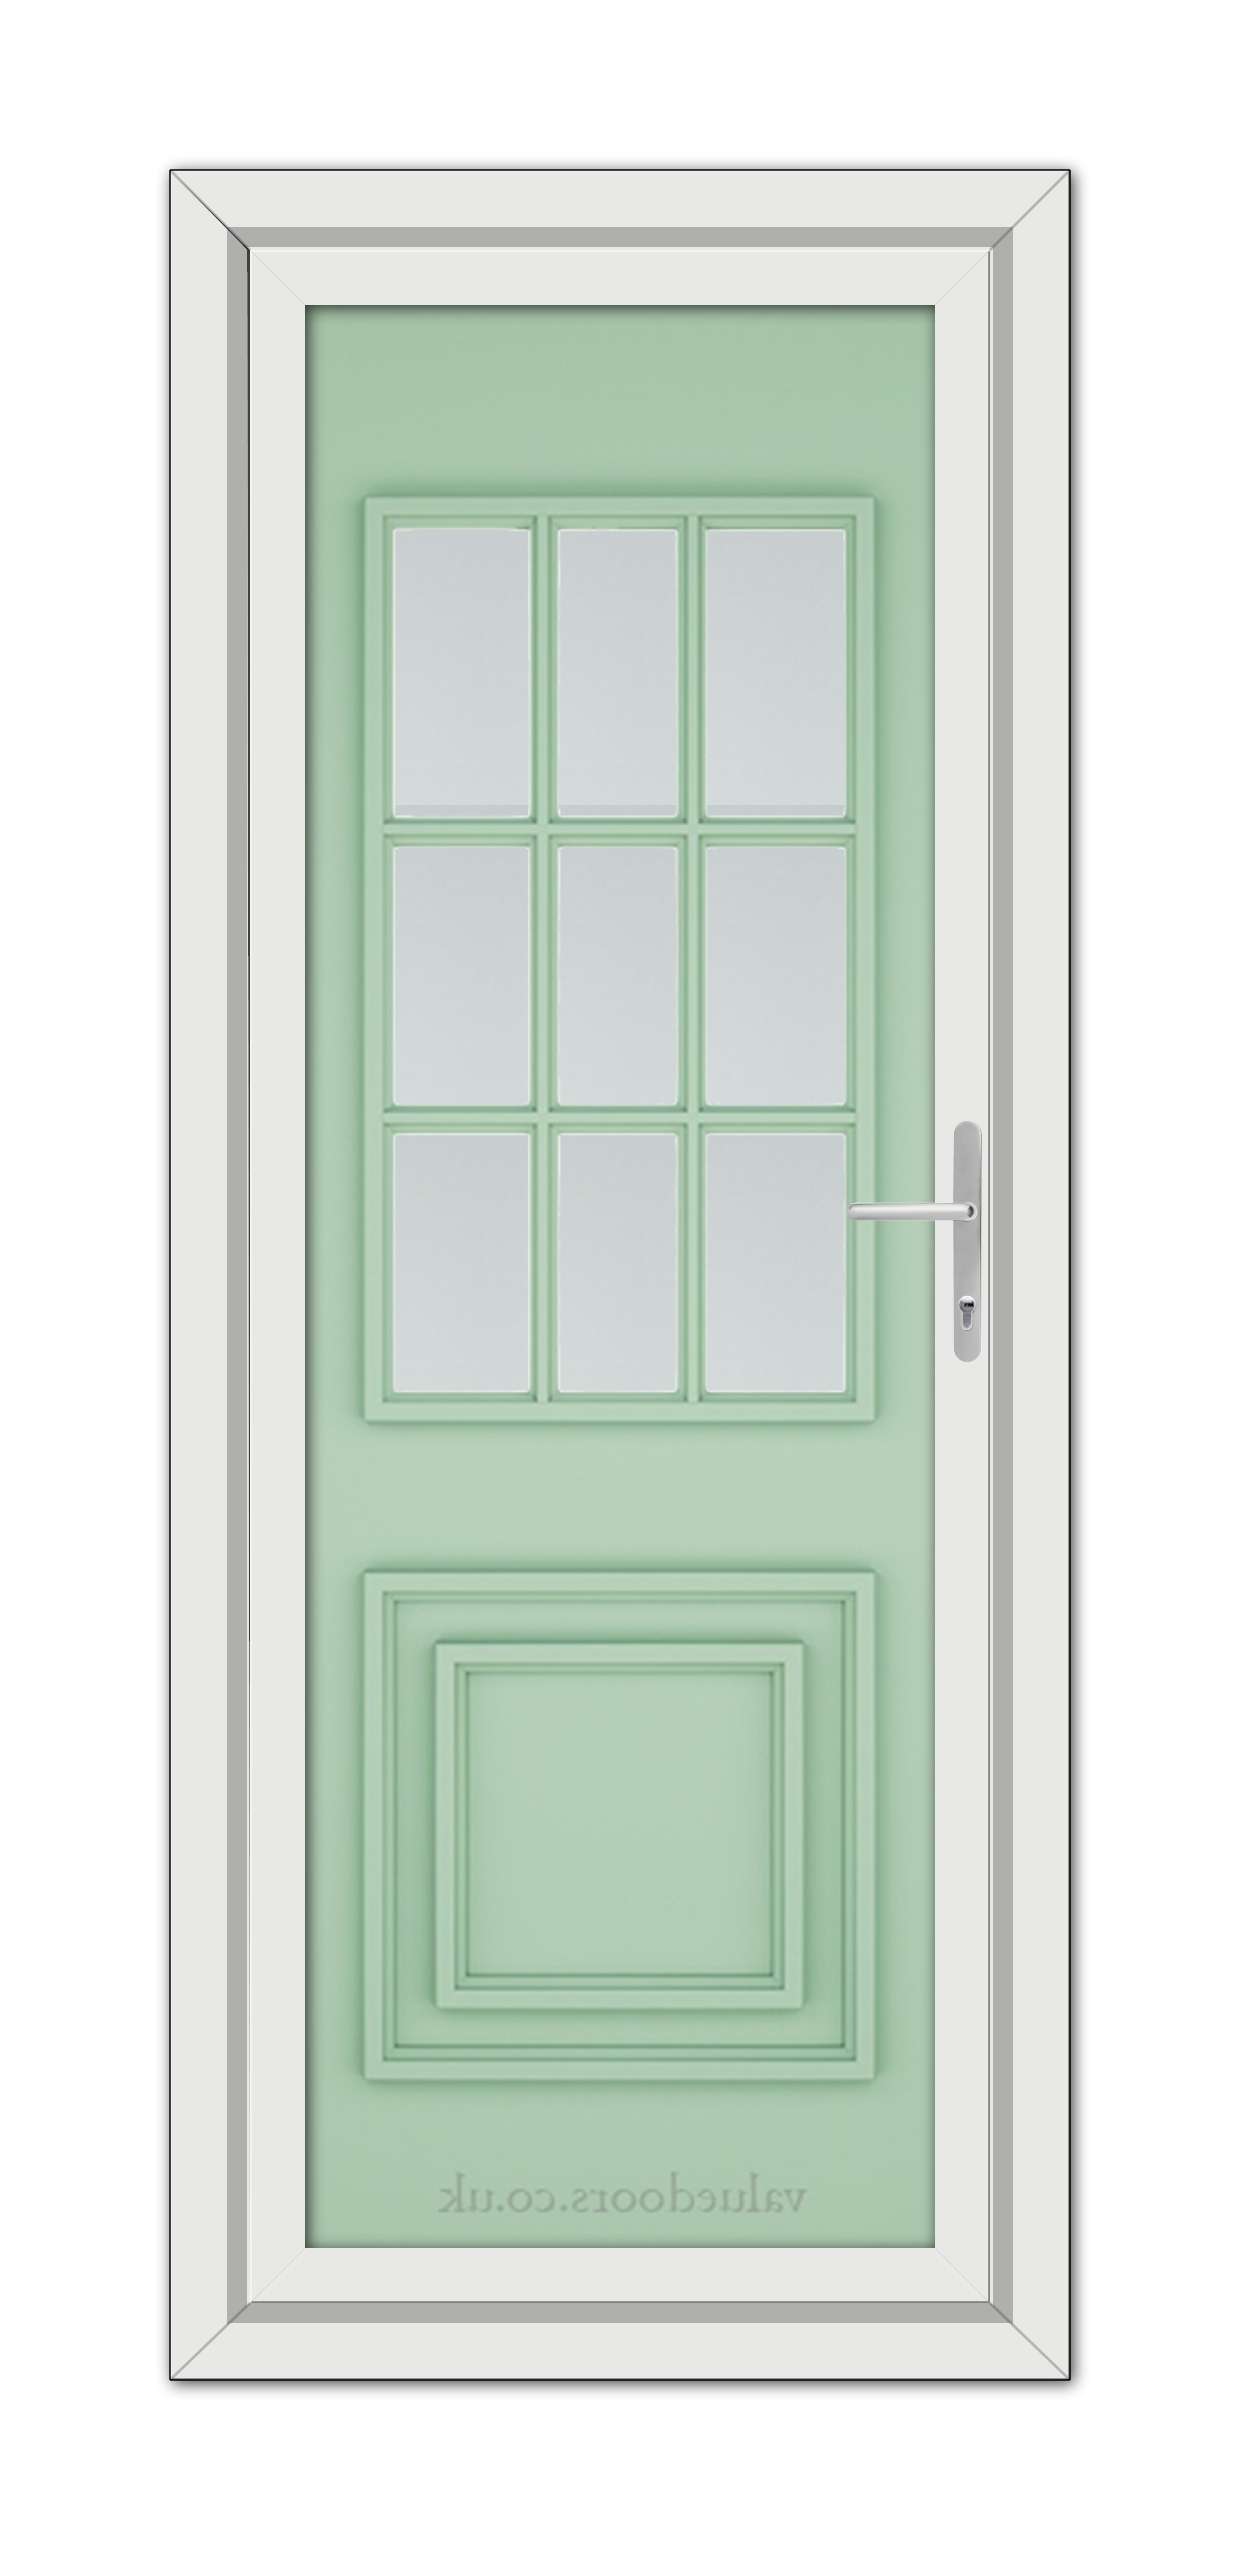 A Chartwell Green Cambridge One uPVC Door with glass panes.